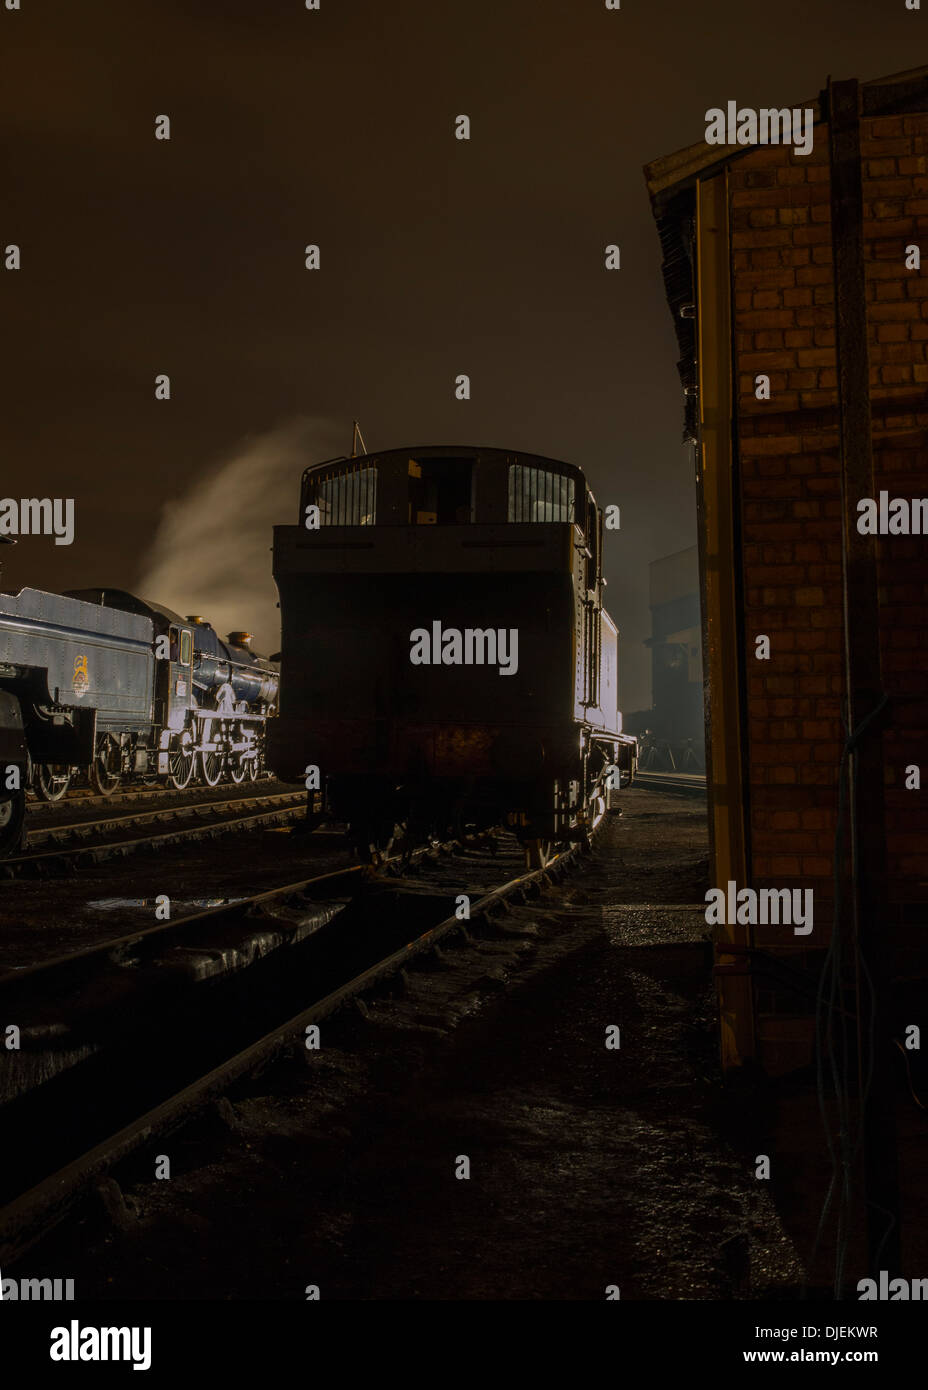 A GWR tank locomotive and 4-6-0 No.6023 King Edward II in steam and lit in silhouette at the GWR Society at Didcot at night Stock Photo